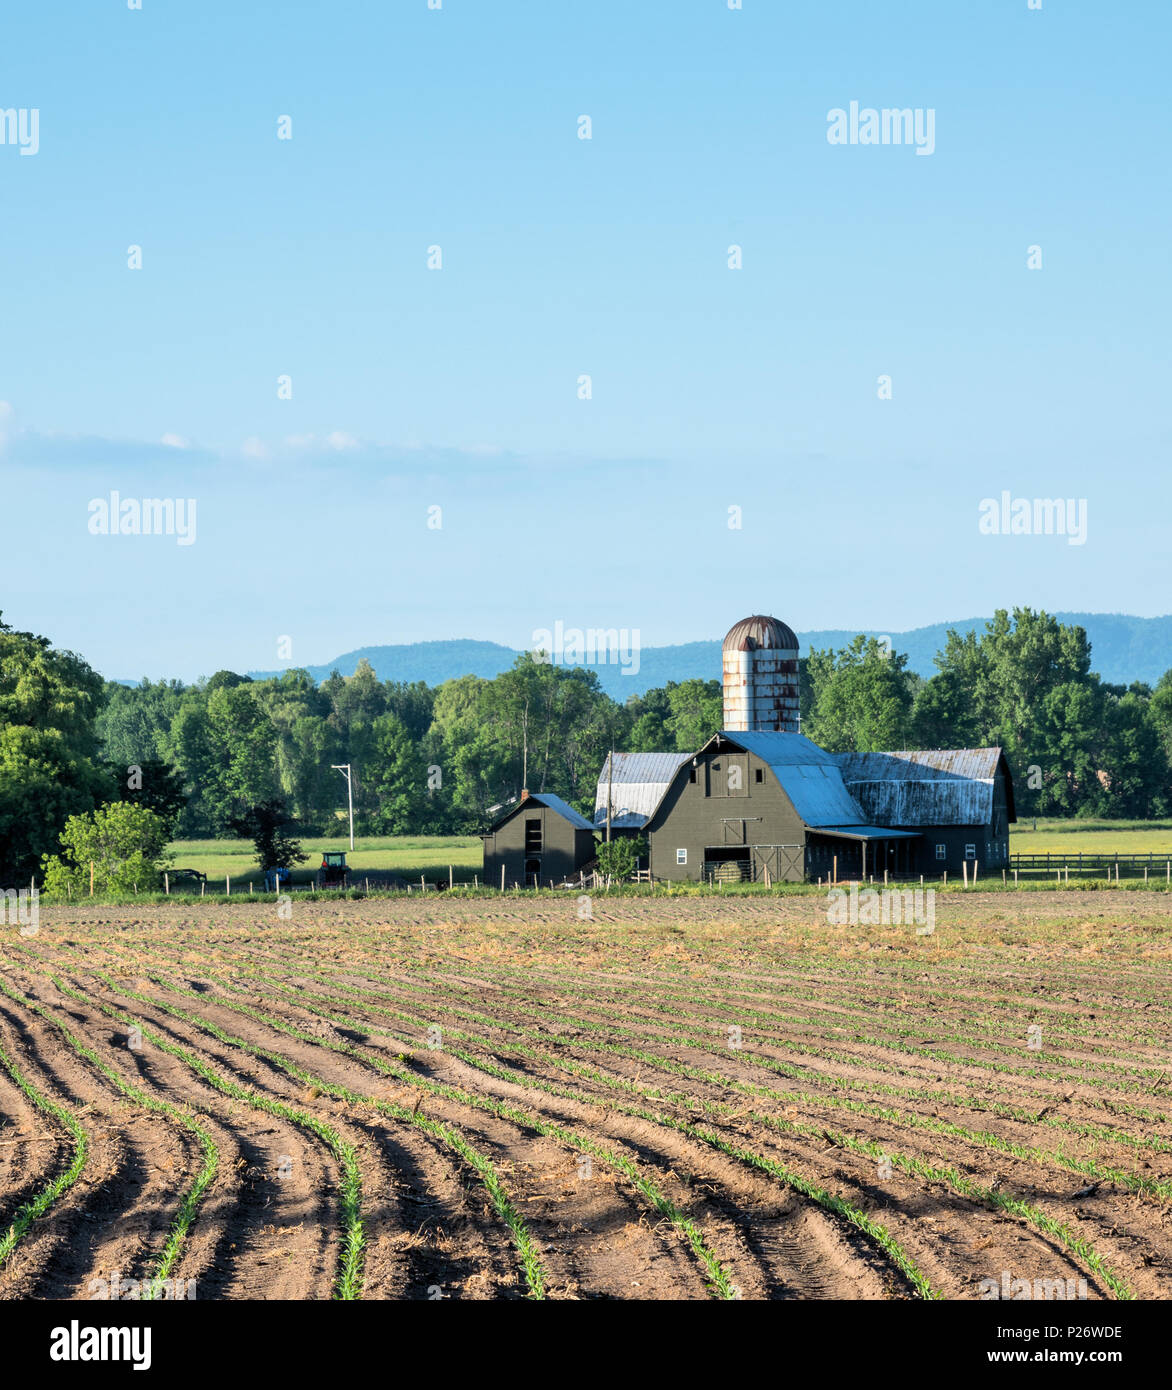 Small farm in the north country of upstate, NY Stock Photo